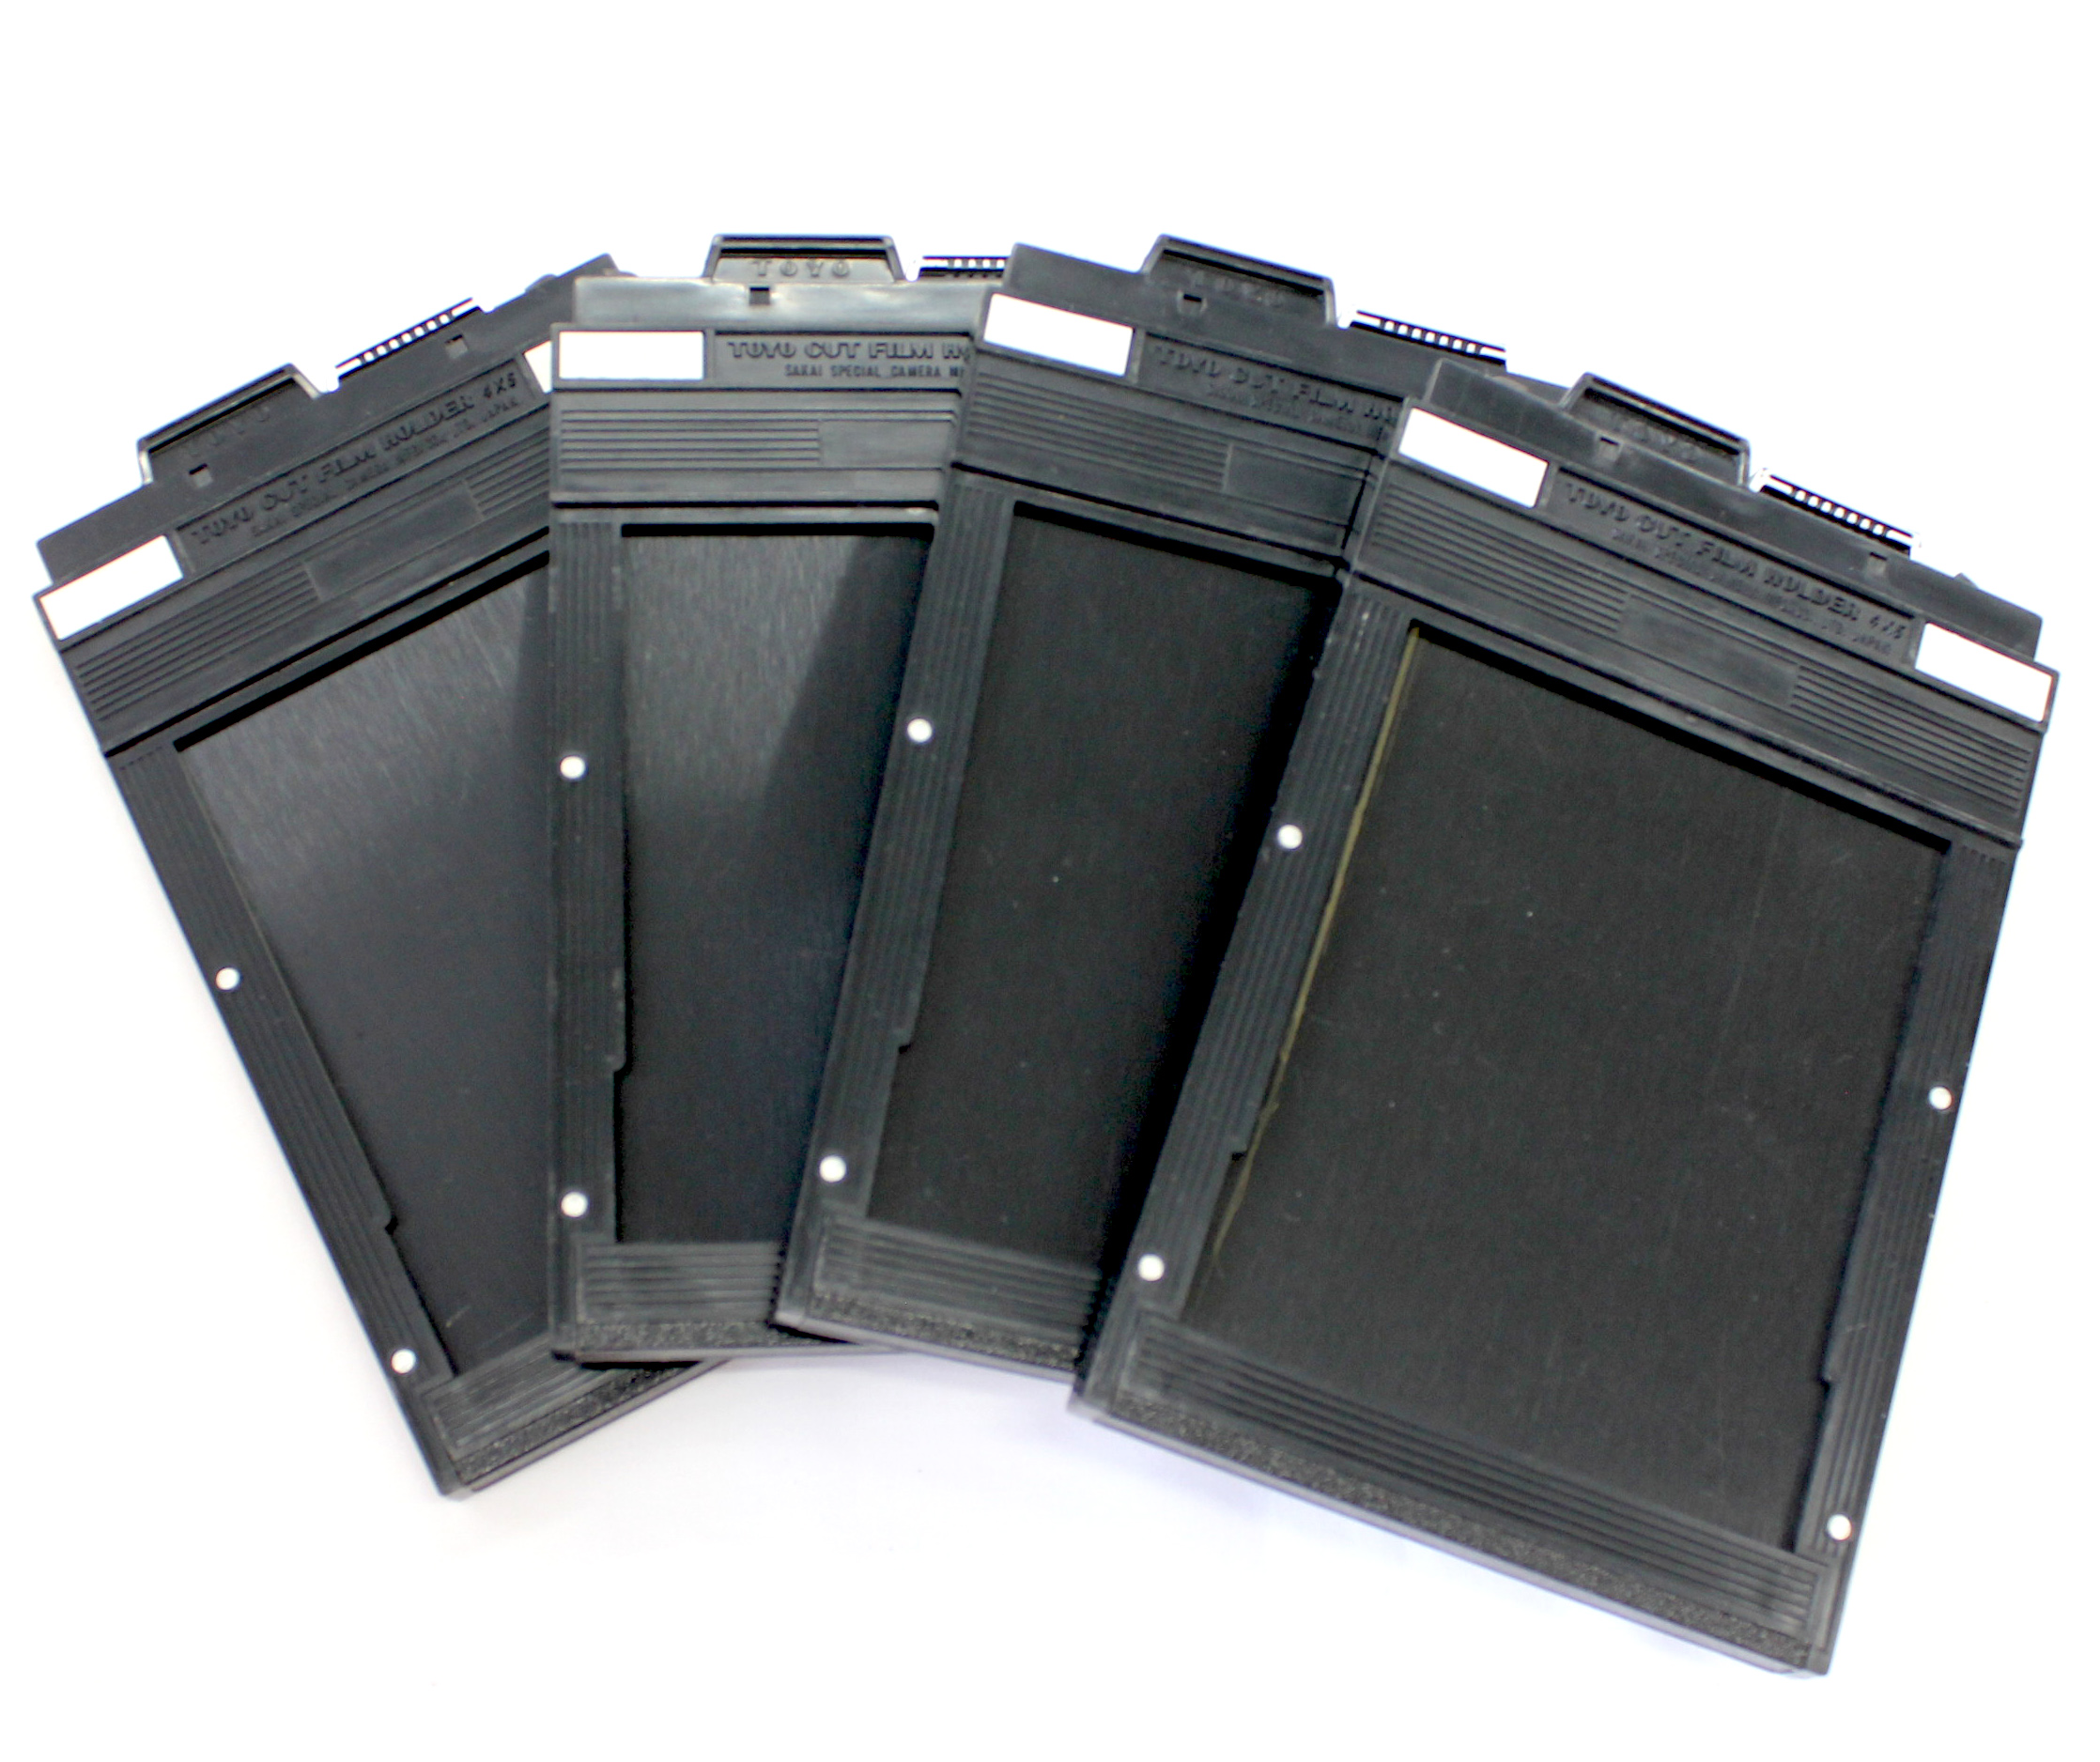 Japan Used Camera Shop | Toyo 4x5 Cut Film Holder Lot of 4 from Japan